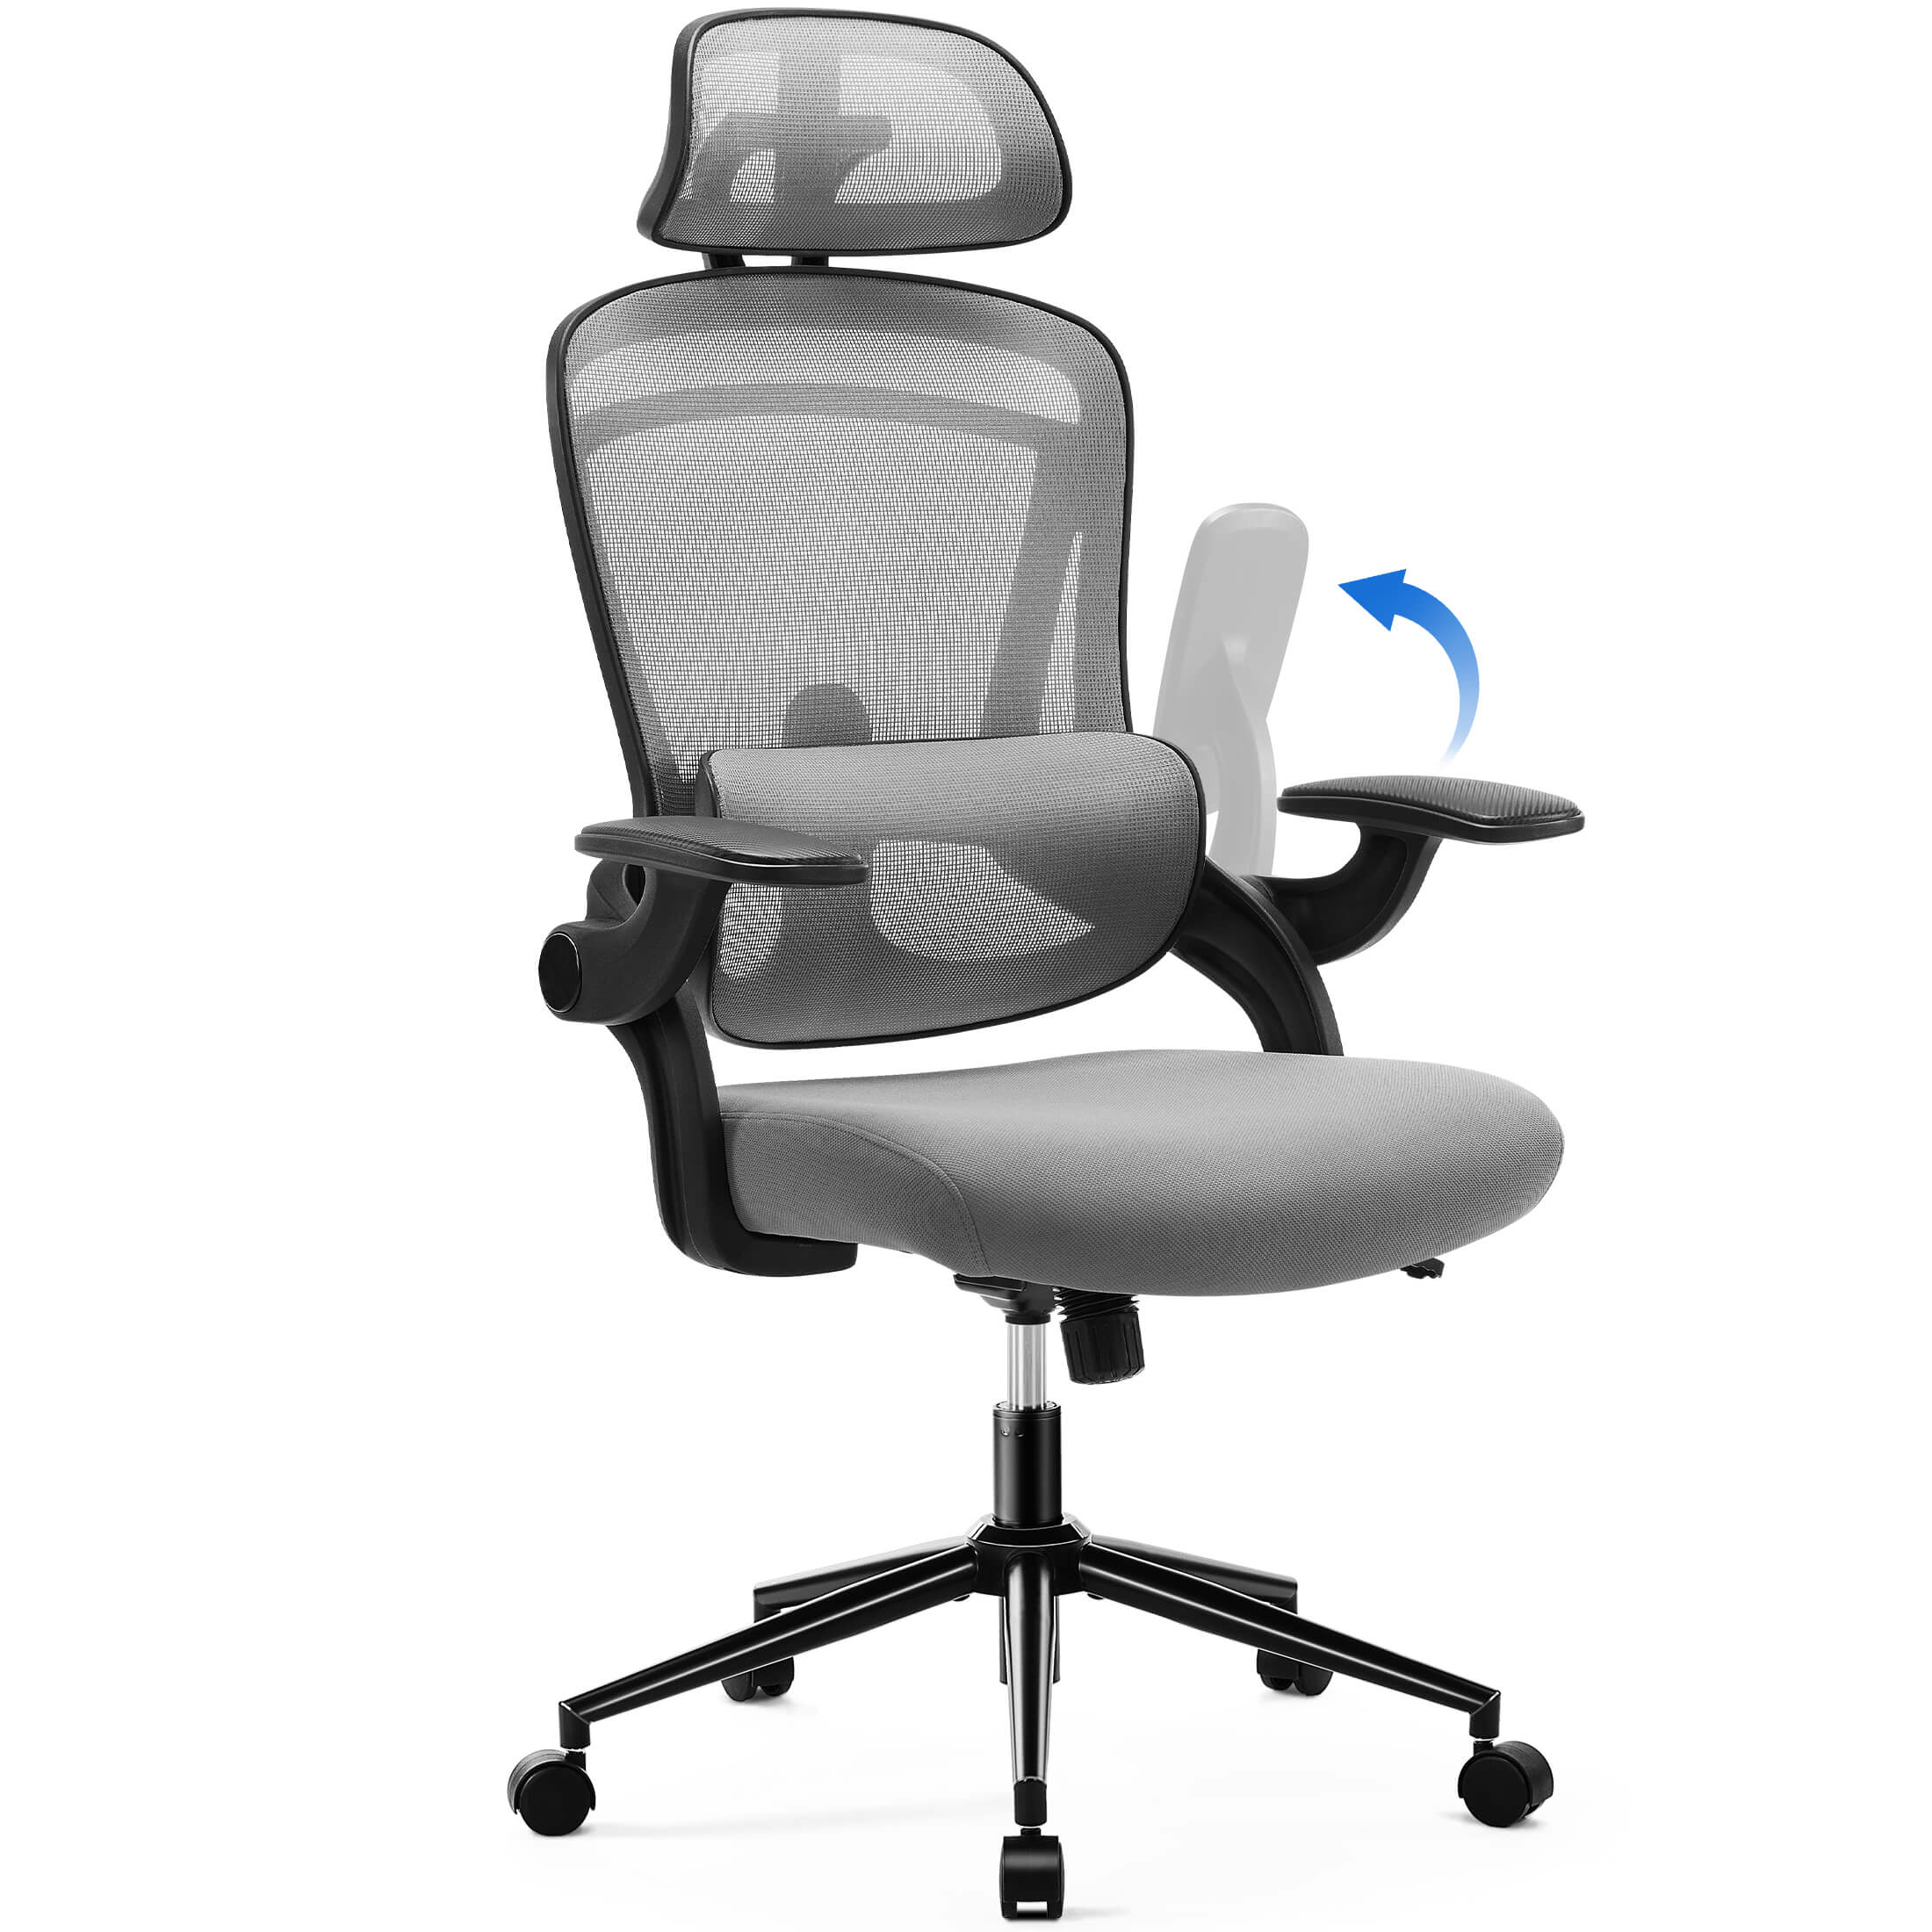 Ergonomic office chair-with adjustable lumbar support and headrest, soft flip-up armrests, height and 120° tilt adjustment